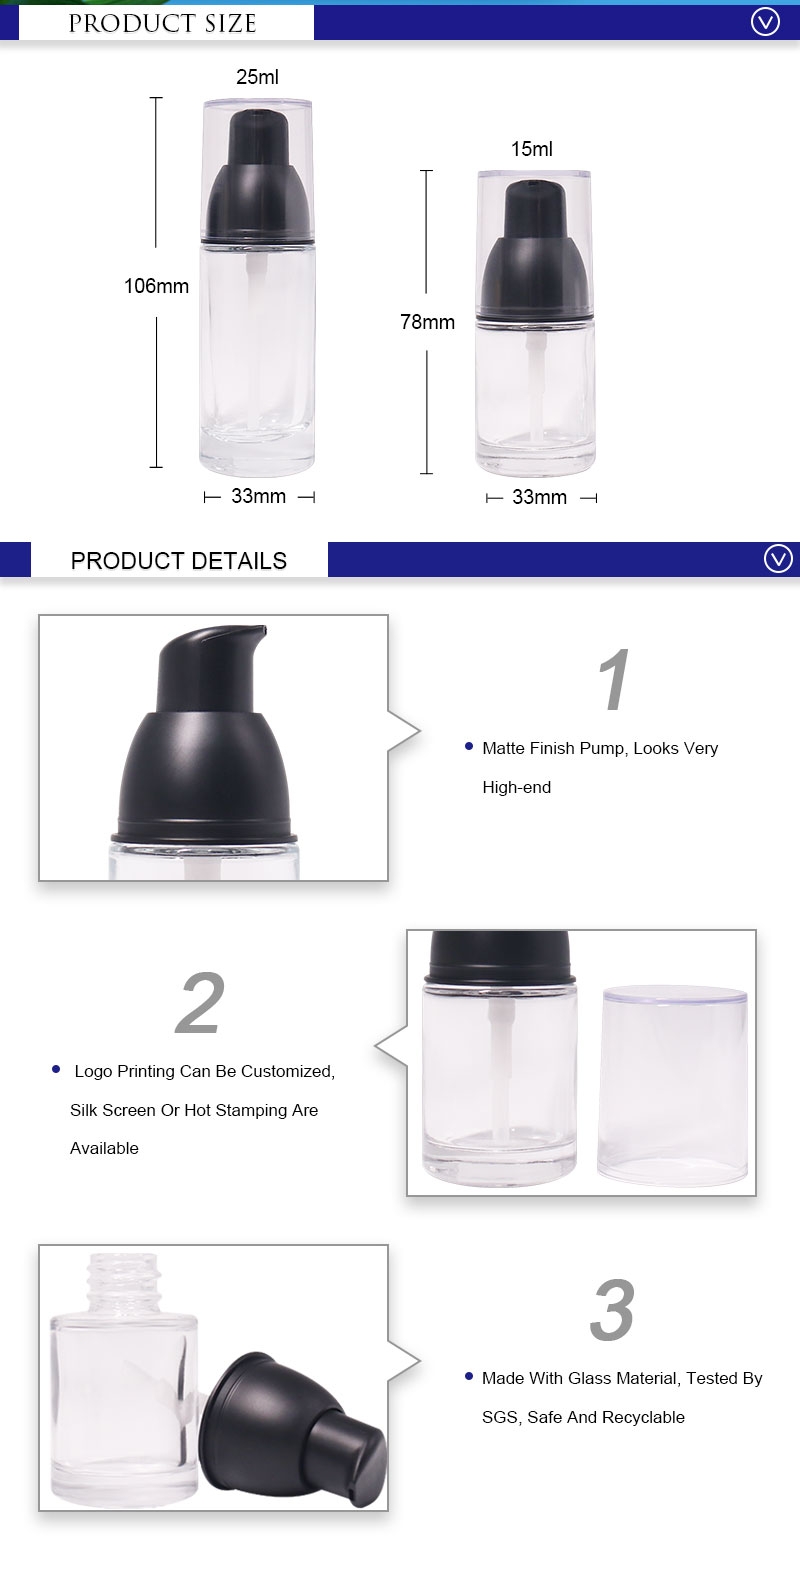 15ml 25ml Glass Lotion Bottles With Black Pump